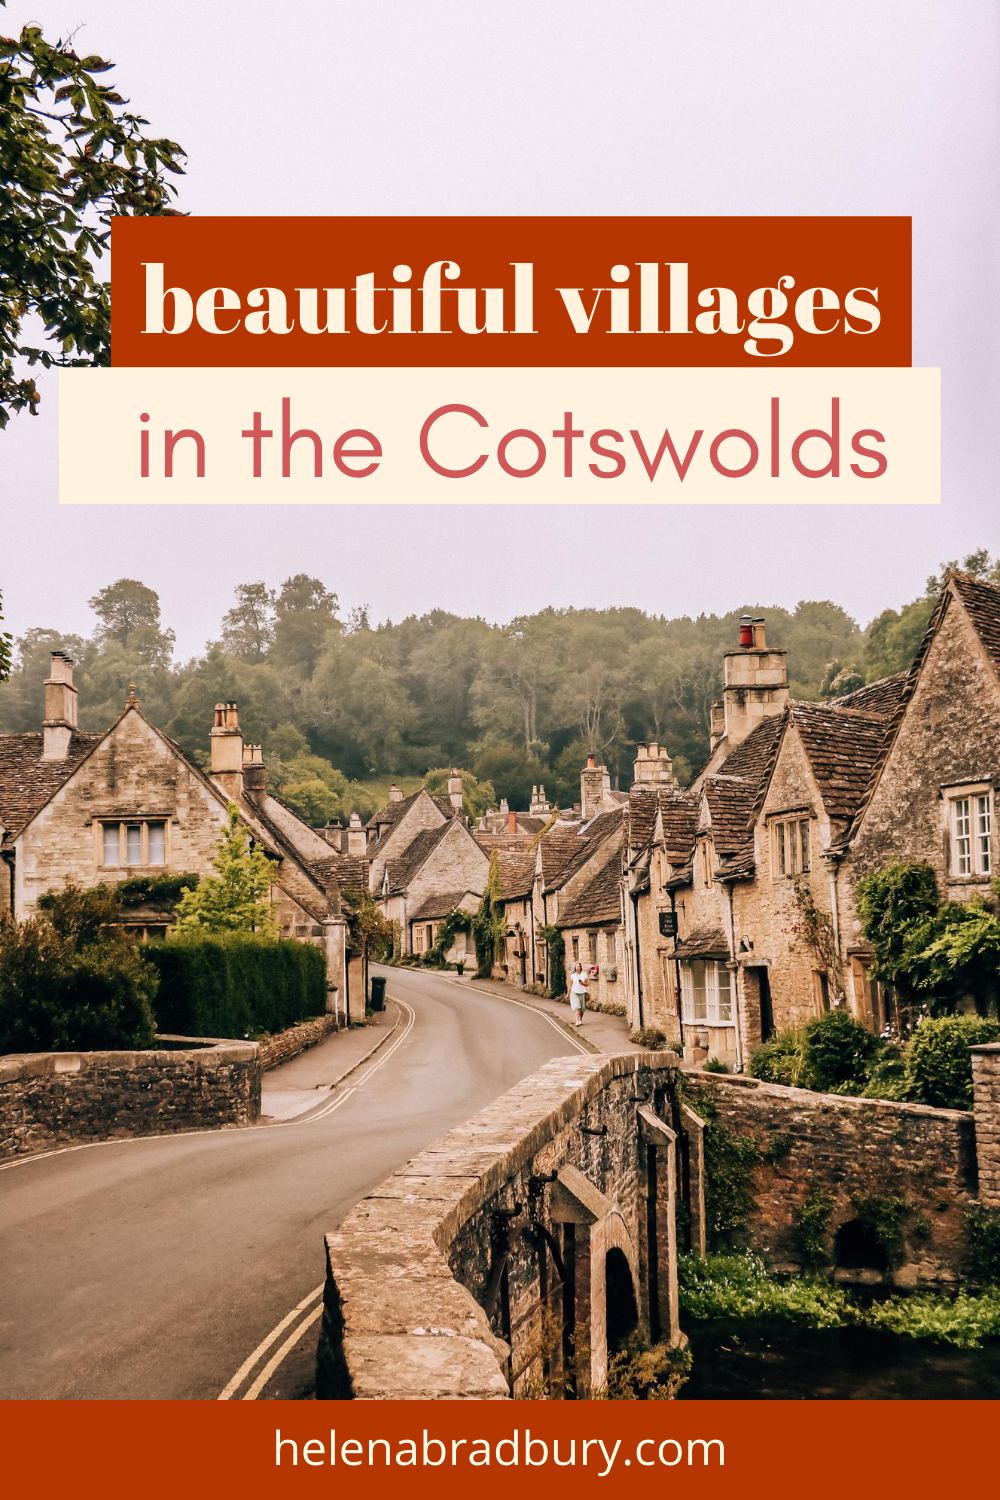 15 beautiful villages to visit in the Cotswolds